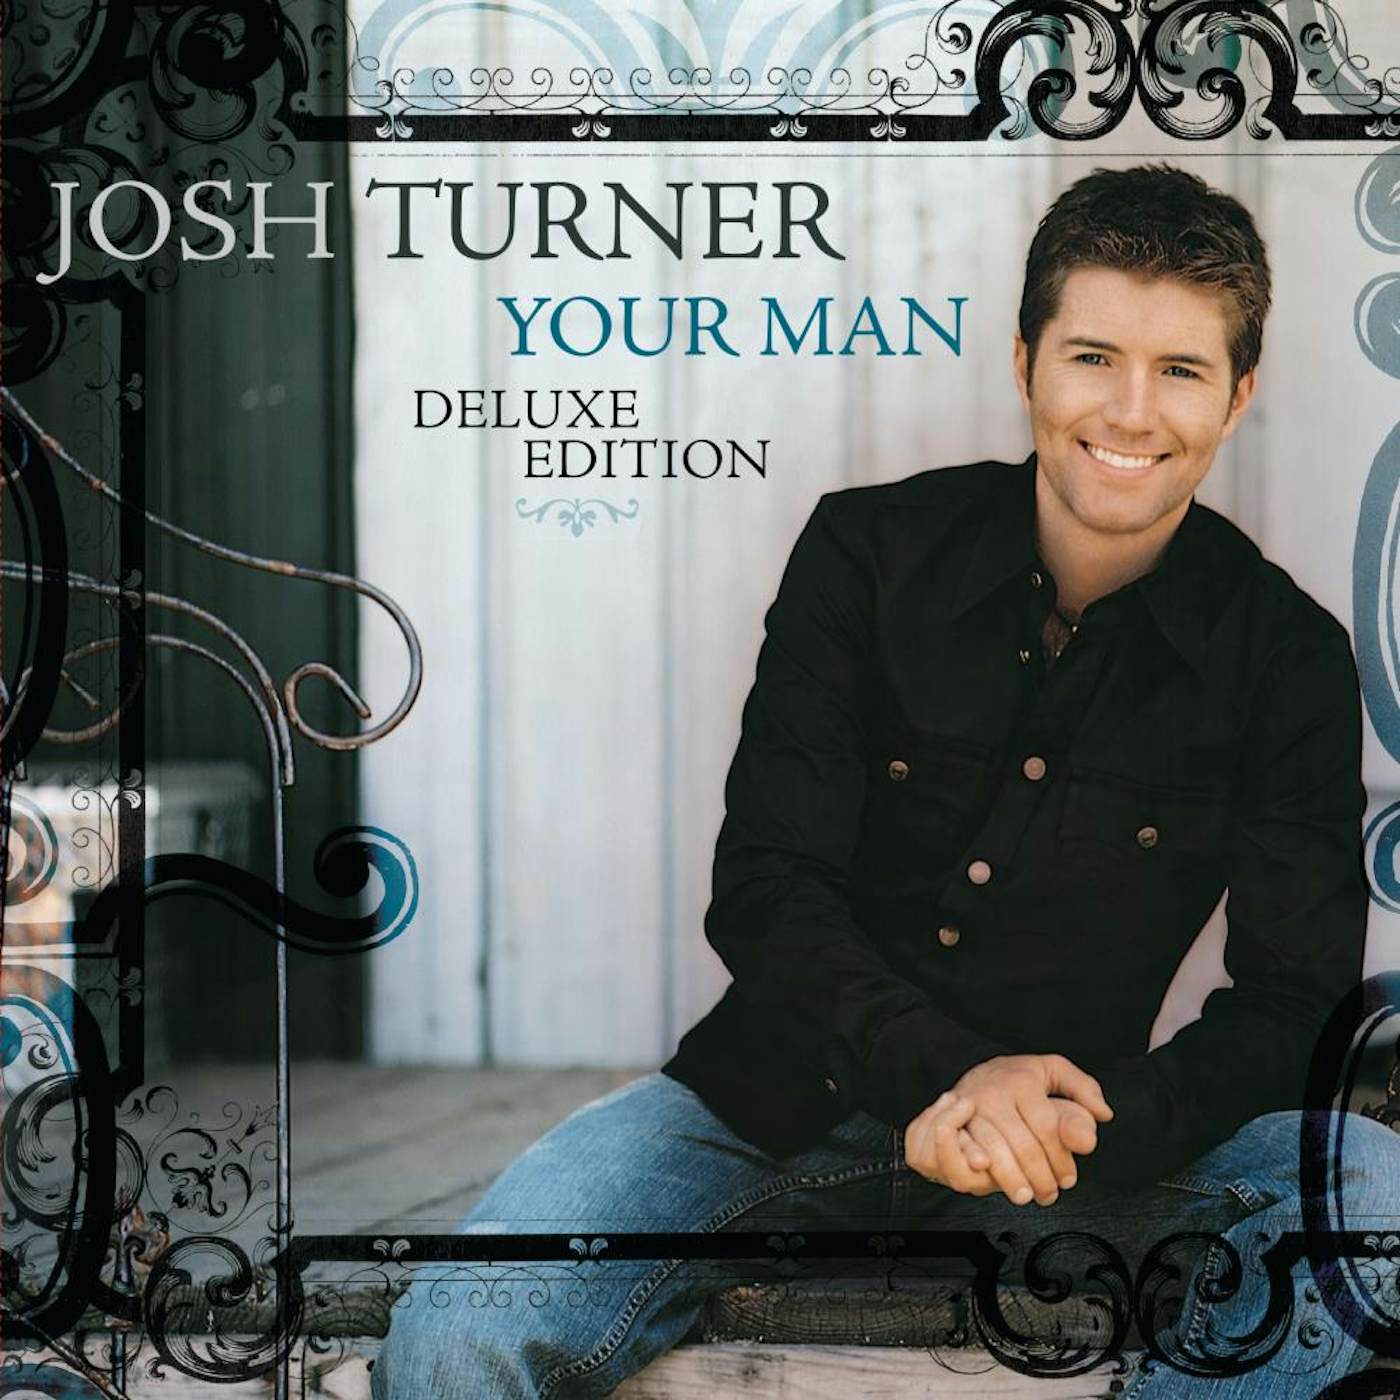 Josh Turner YOUR MAN (15TH ANNIVERSARY DELUXE EDITION) CD